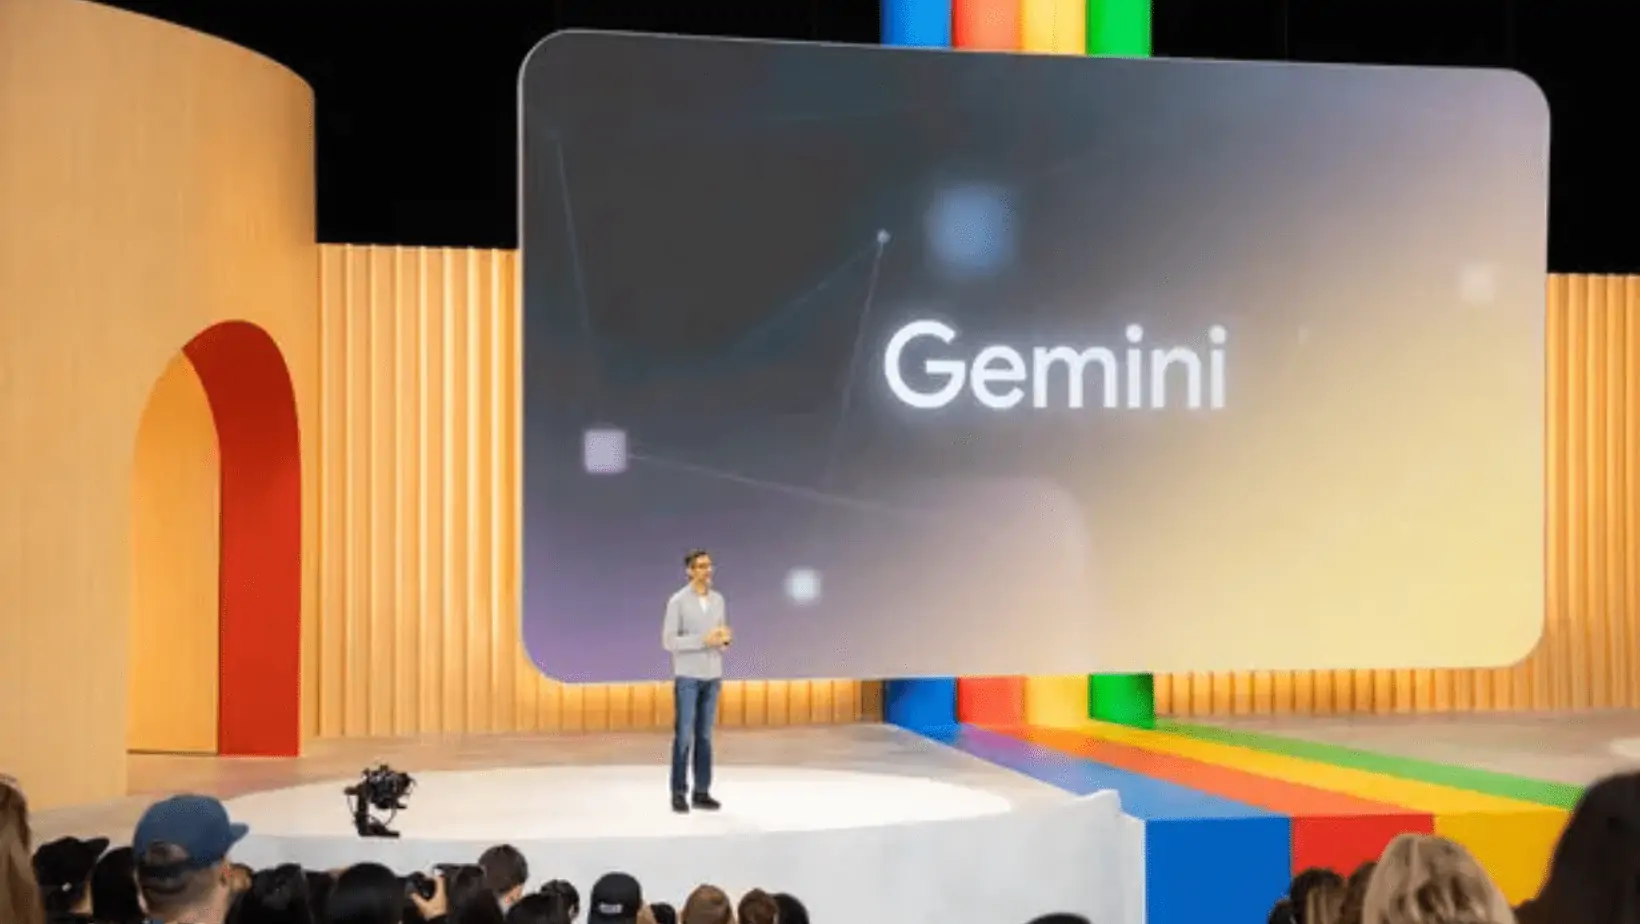 Gemini Chatbot Faces Backlash Over Cultural Insensitivity and Song Recognition Failures